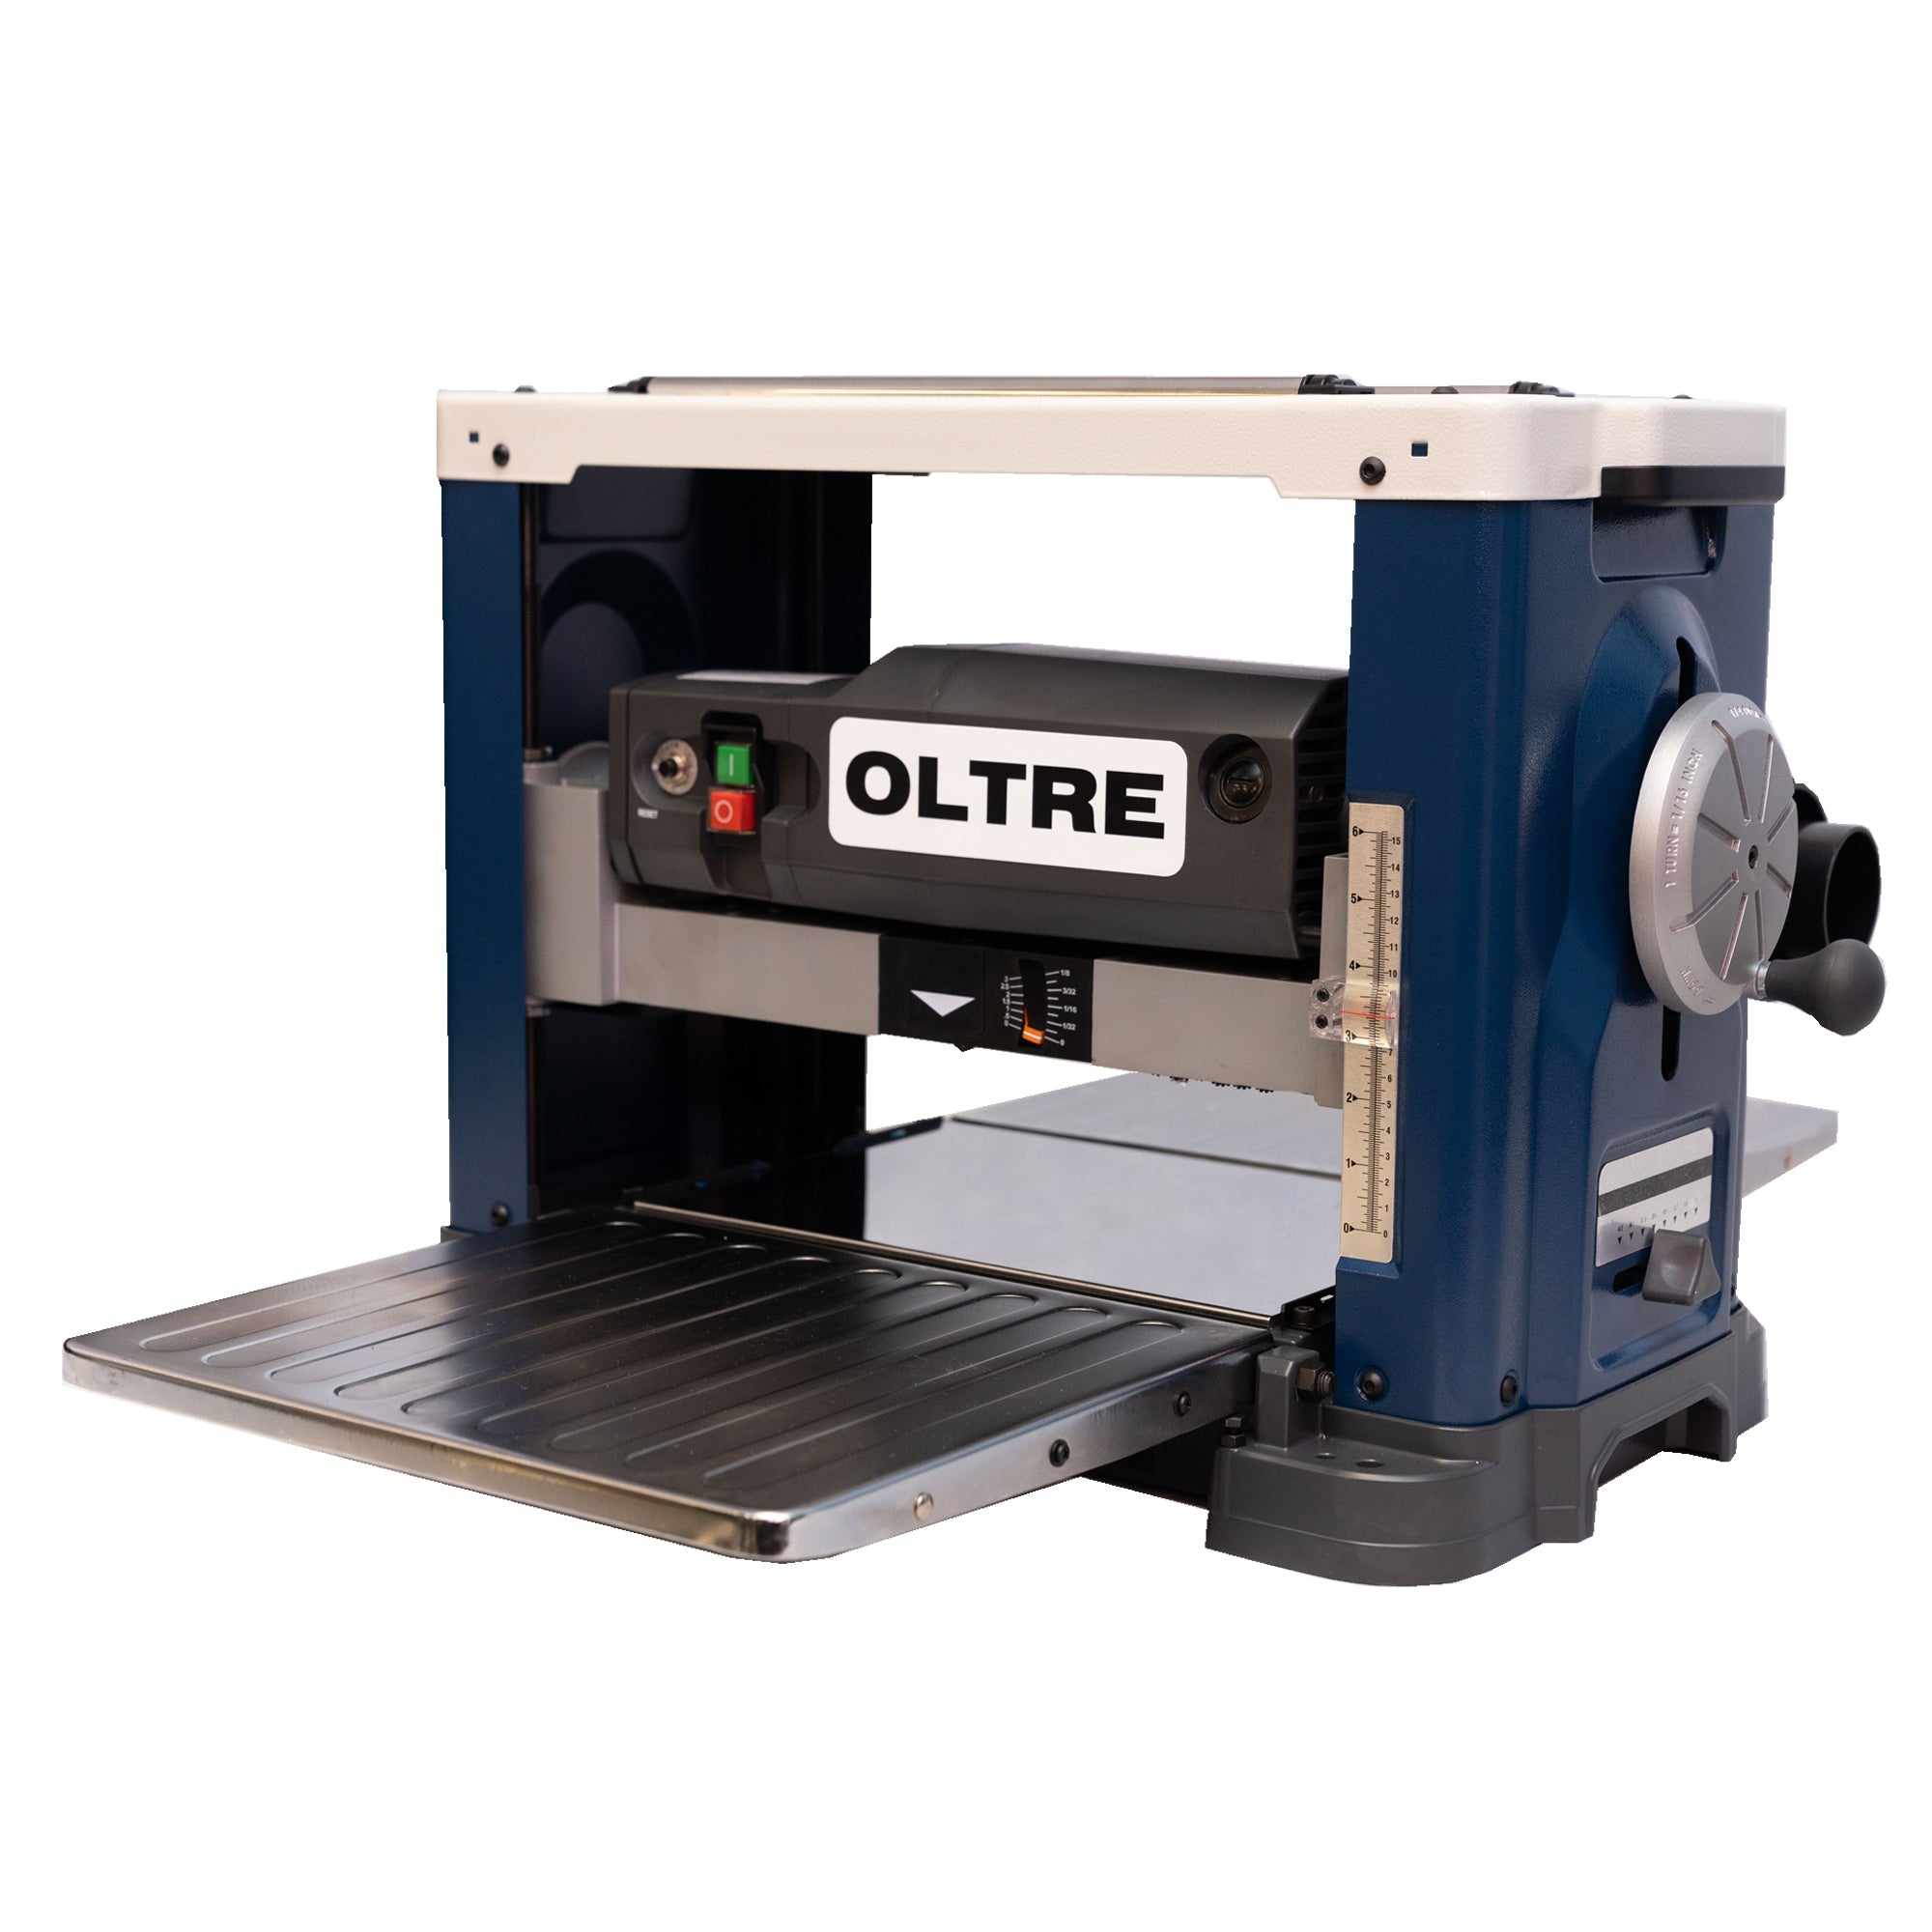 330mm (13") Benchtop Thicknesser OT-TH-330 by Oltre